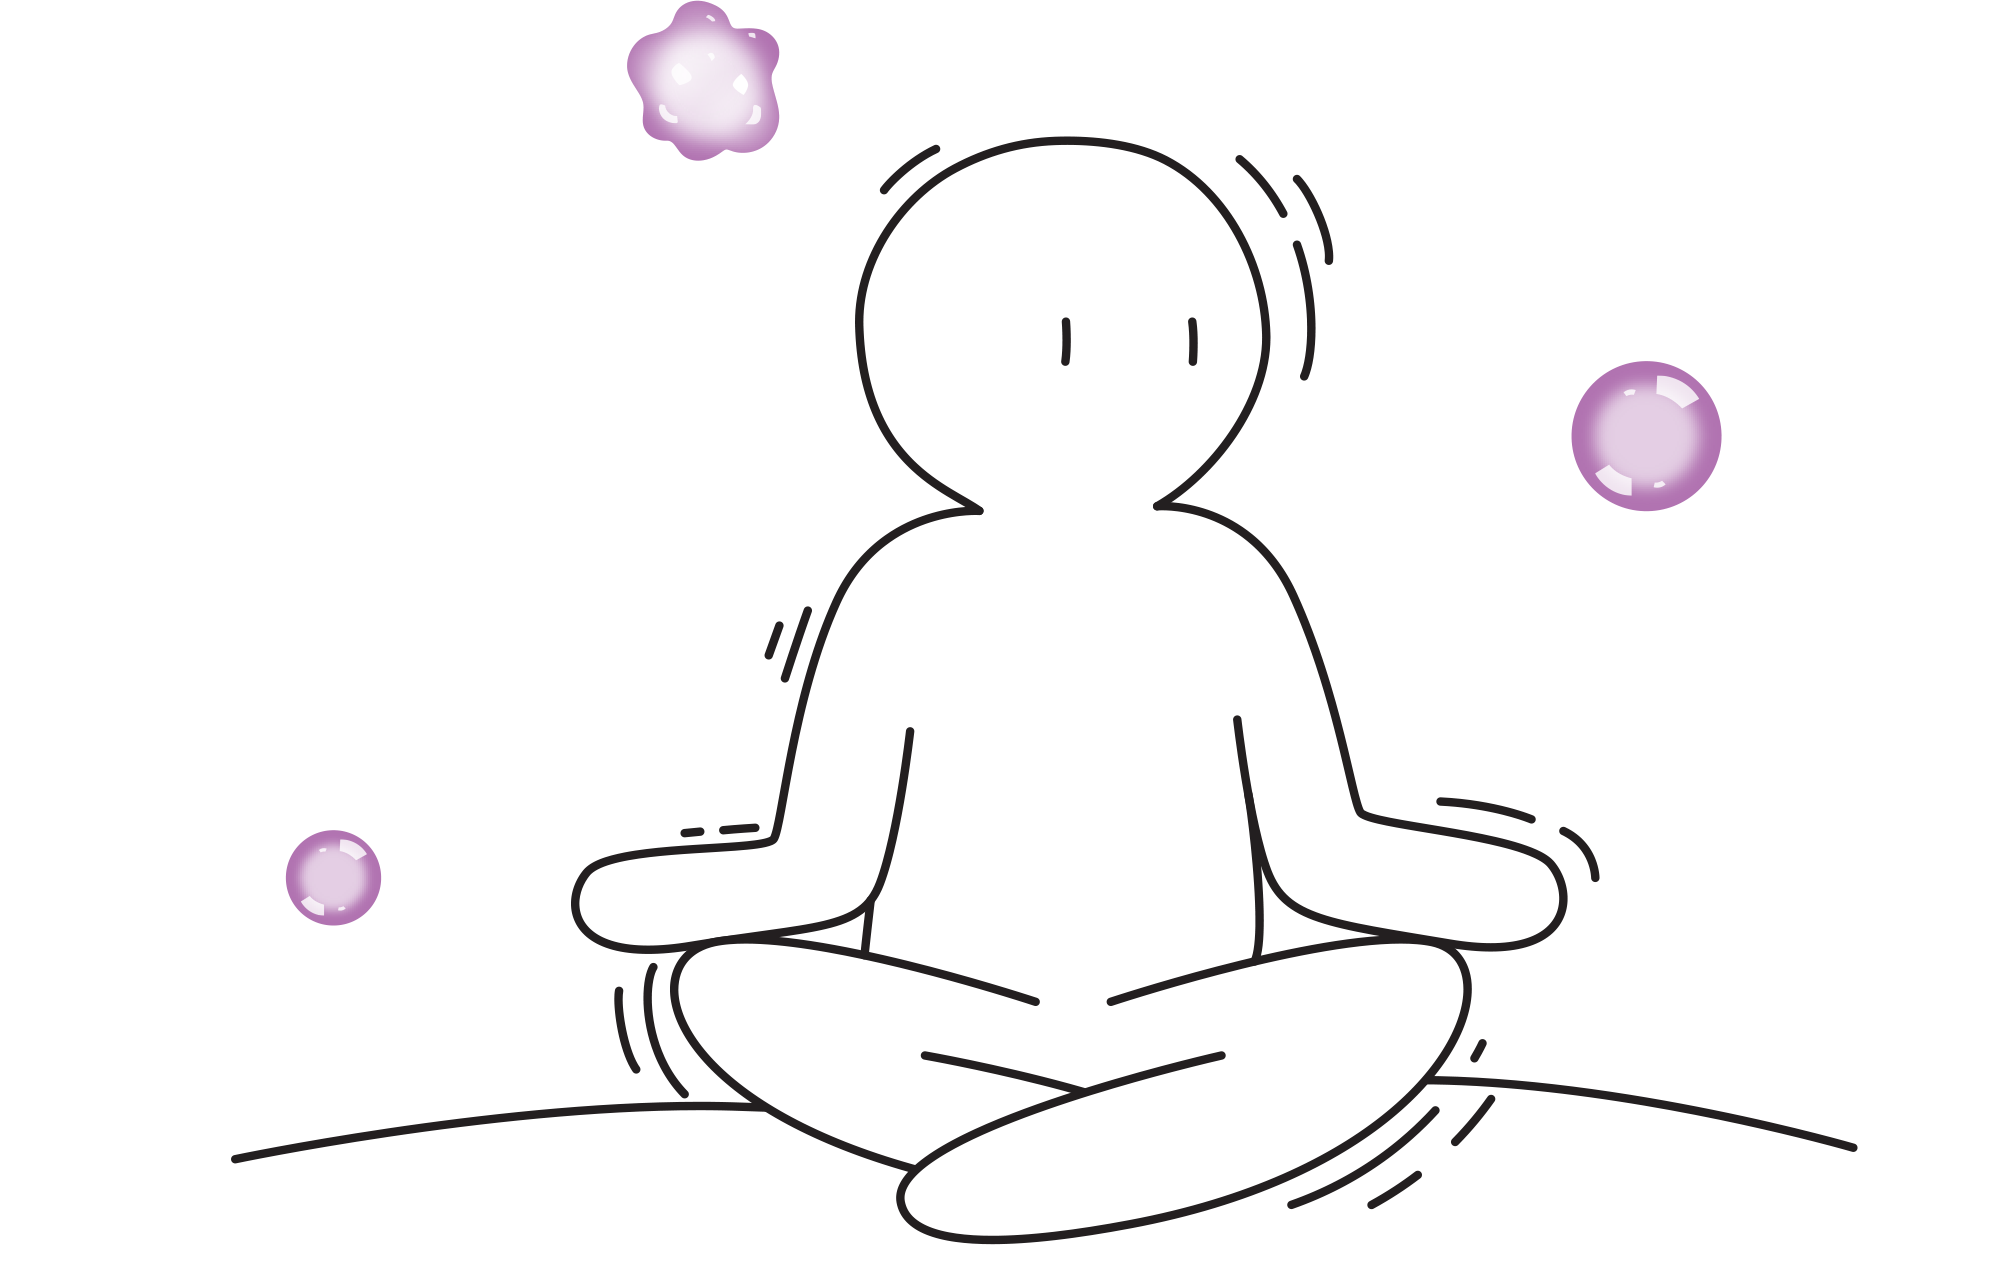 Focus on a still body so you can do this short meditation.